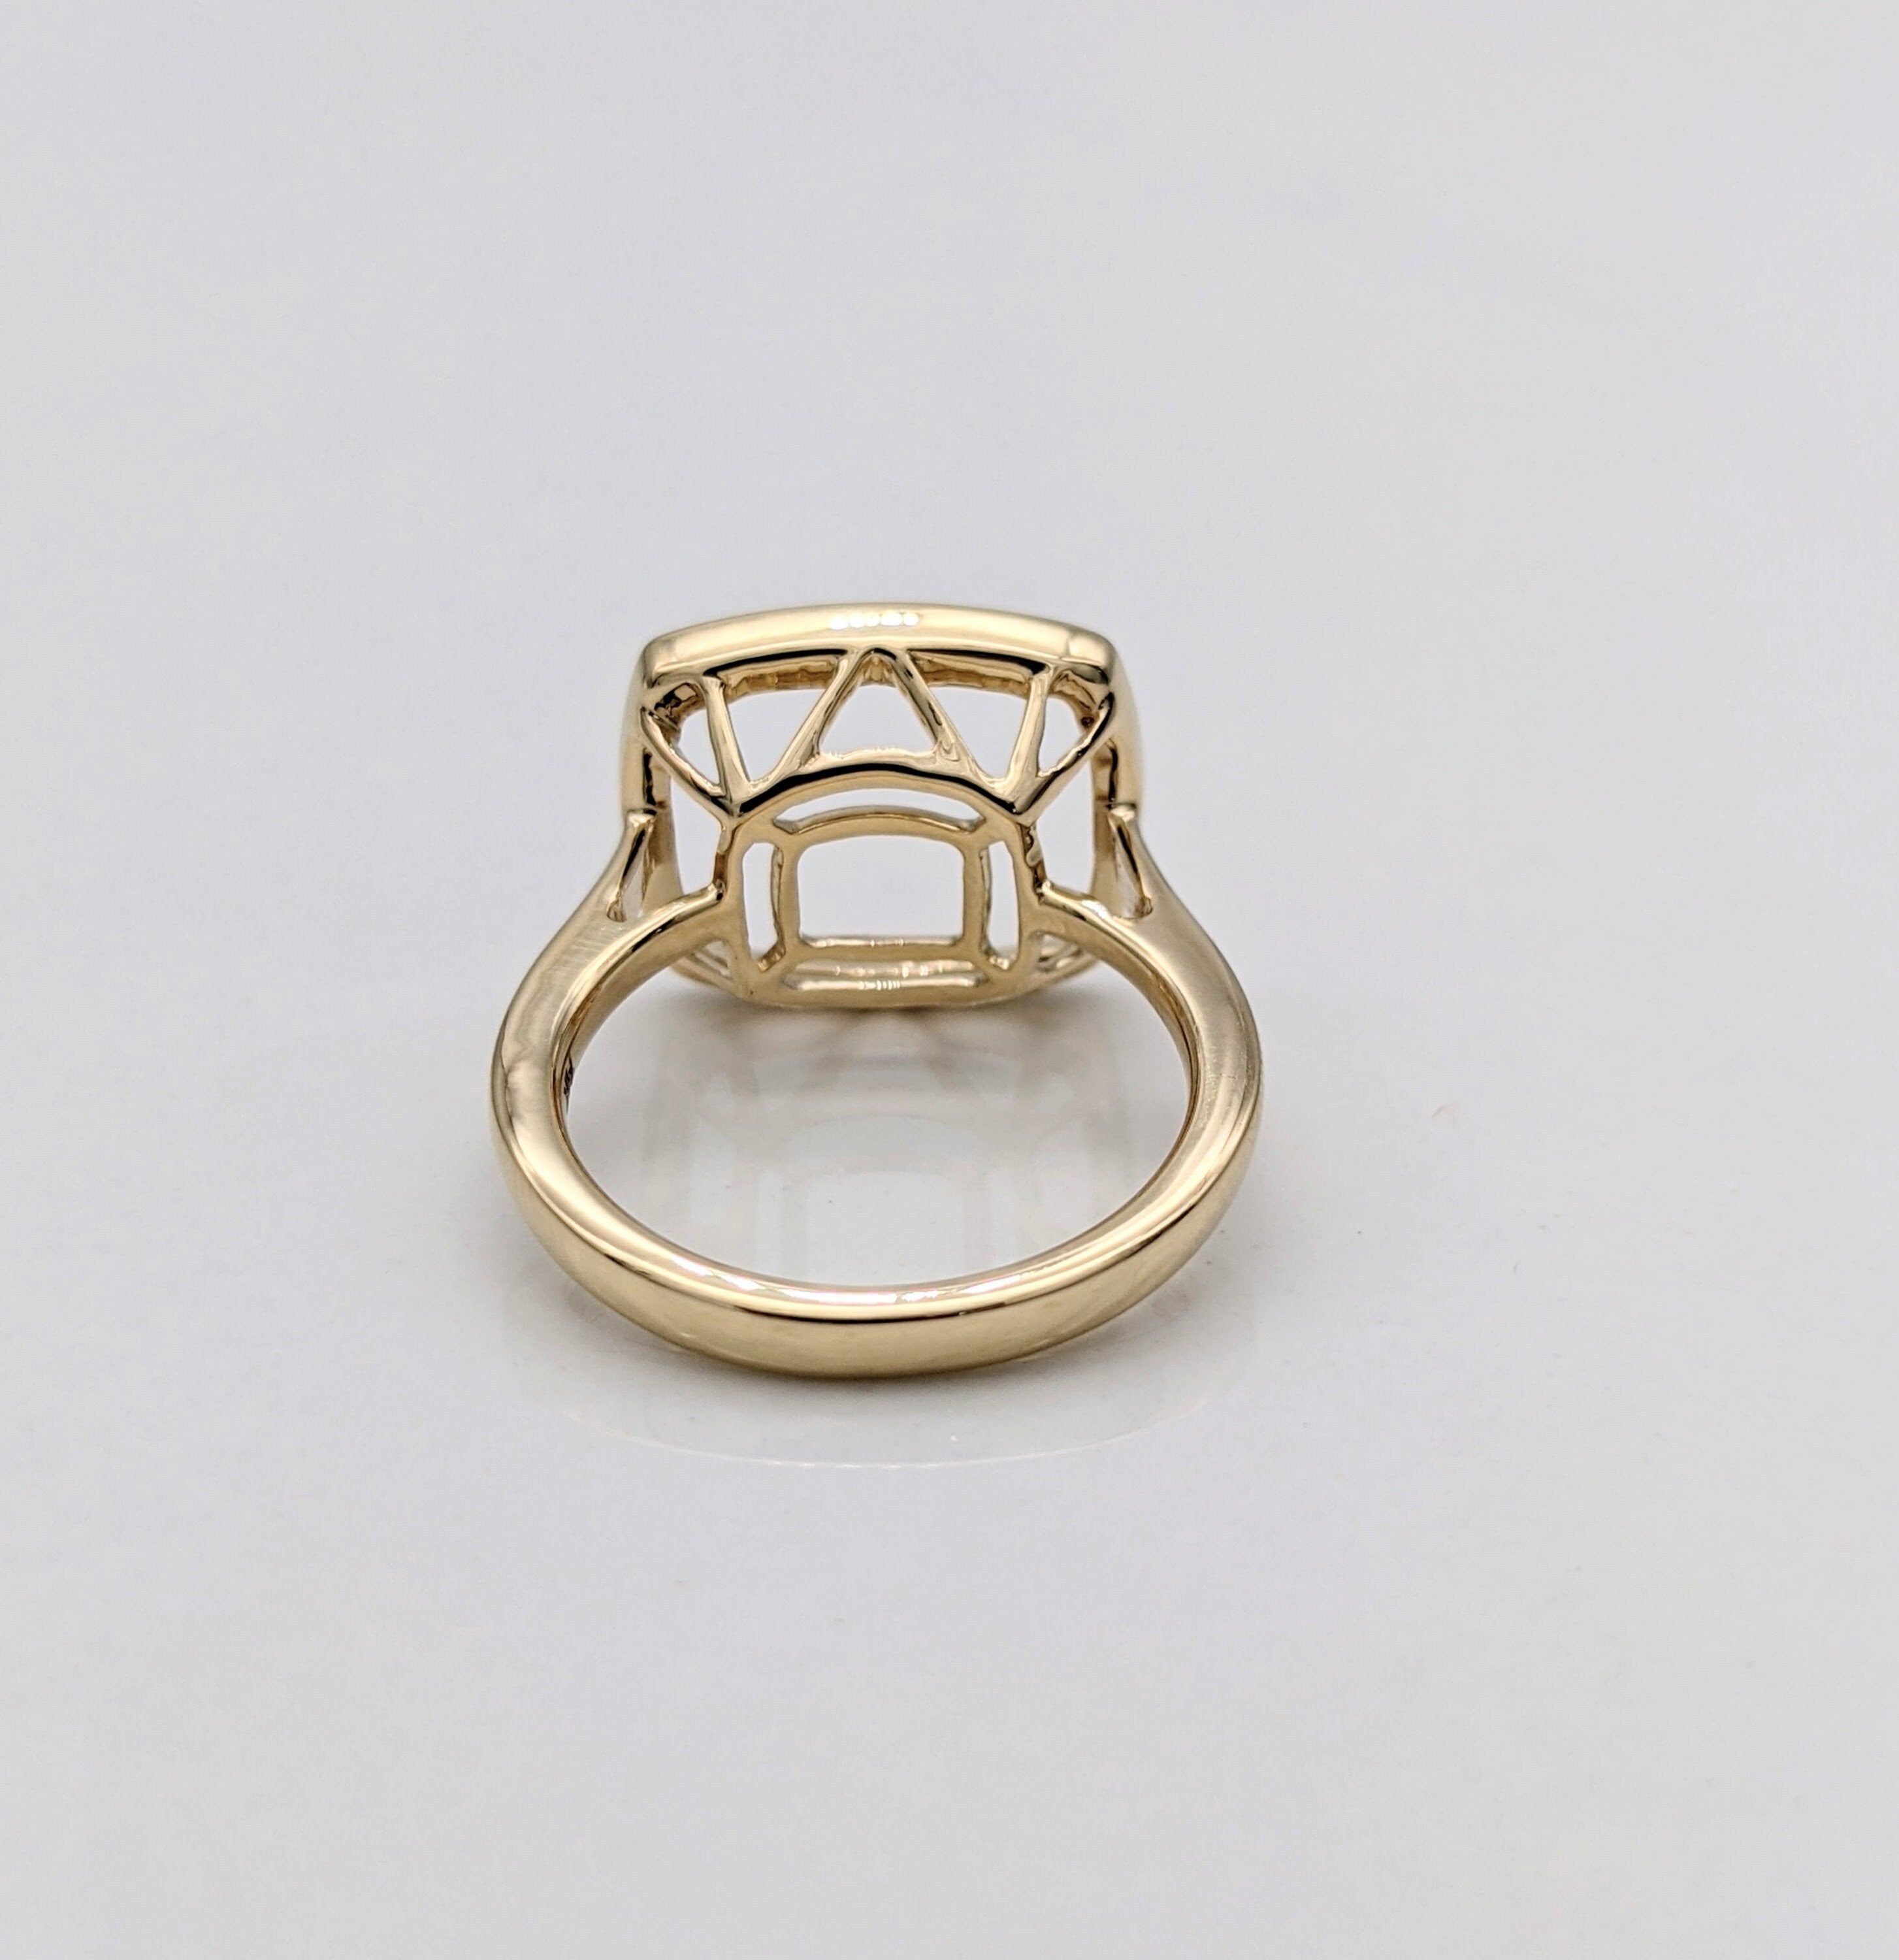 Bezel Set Ring Mount w a Rounded Comfort Shank in Solid 14k Gold | Cushion Cut | Solitaire Setting | Customizable